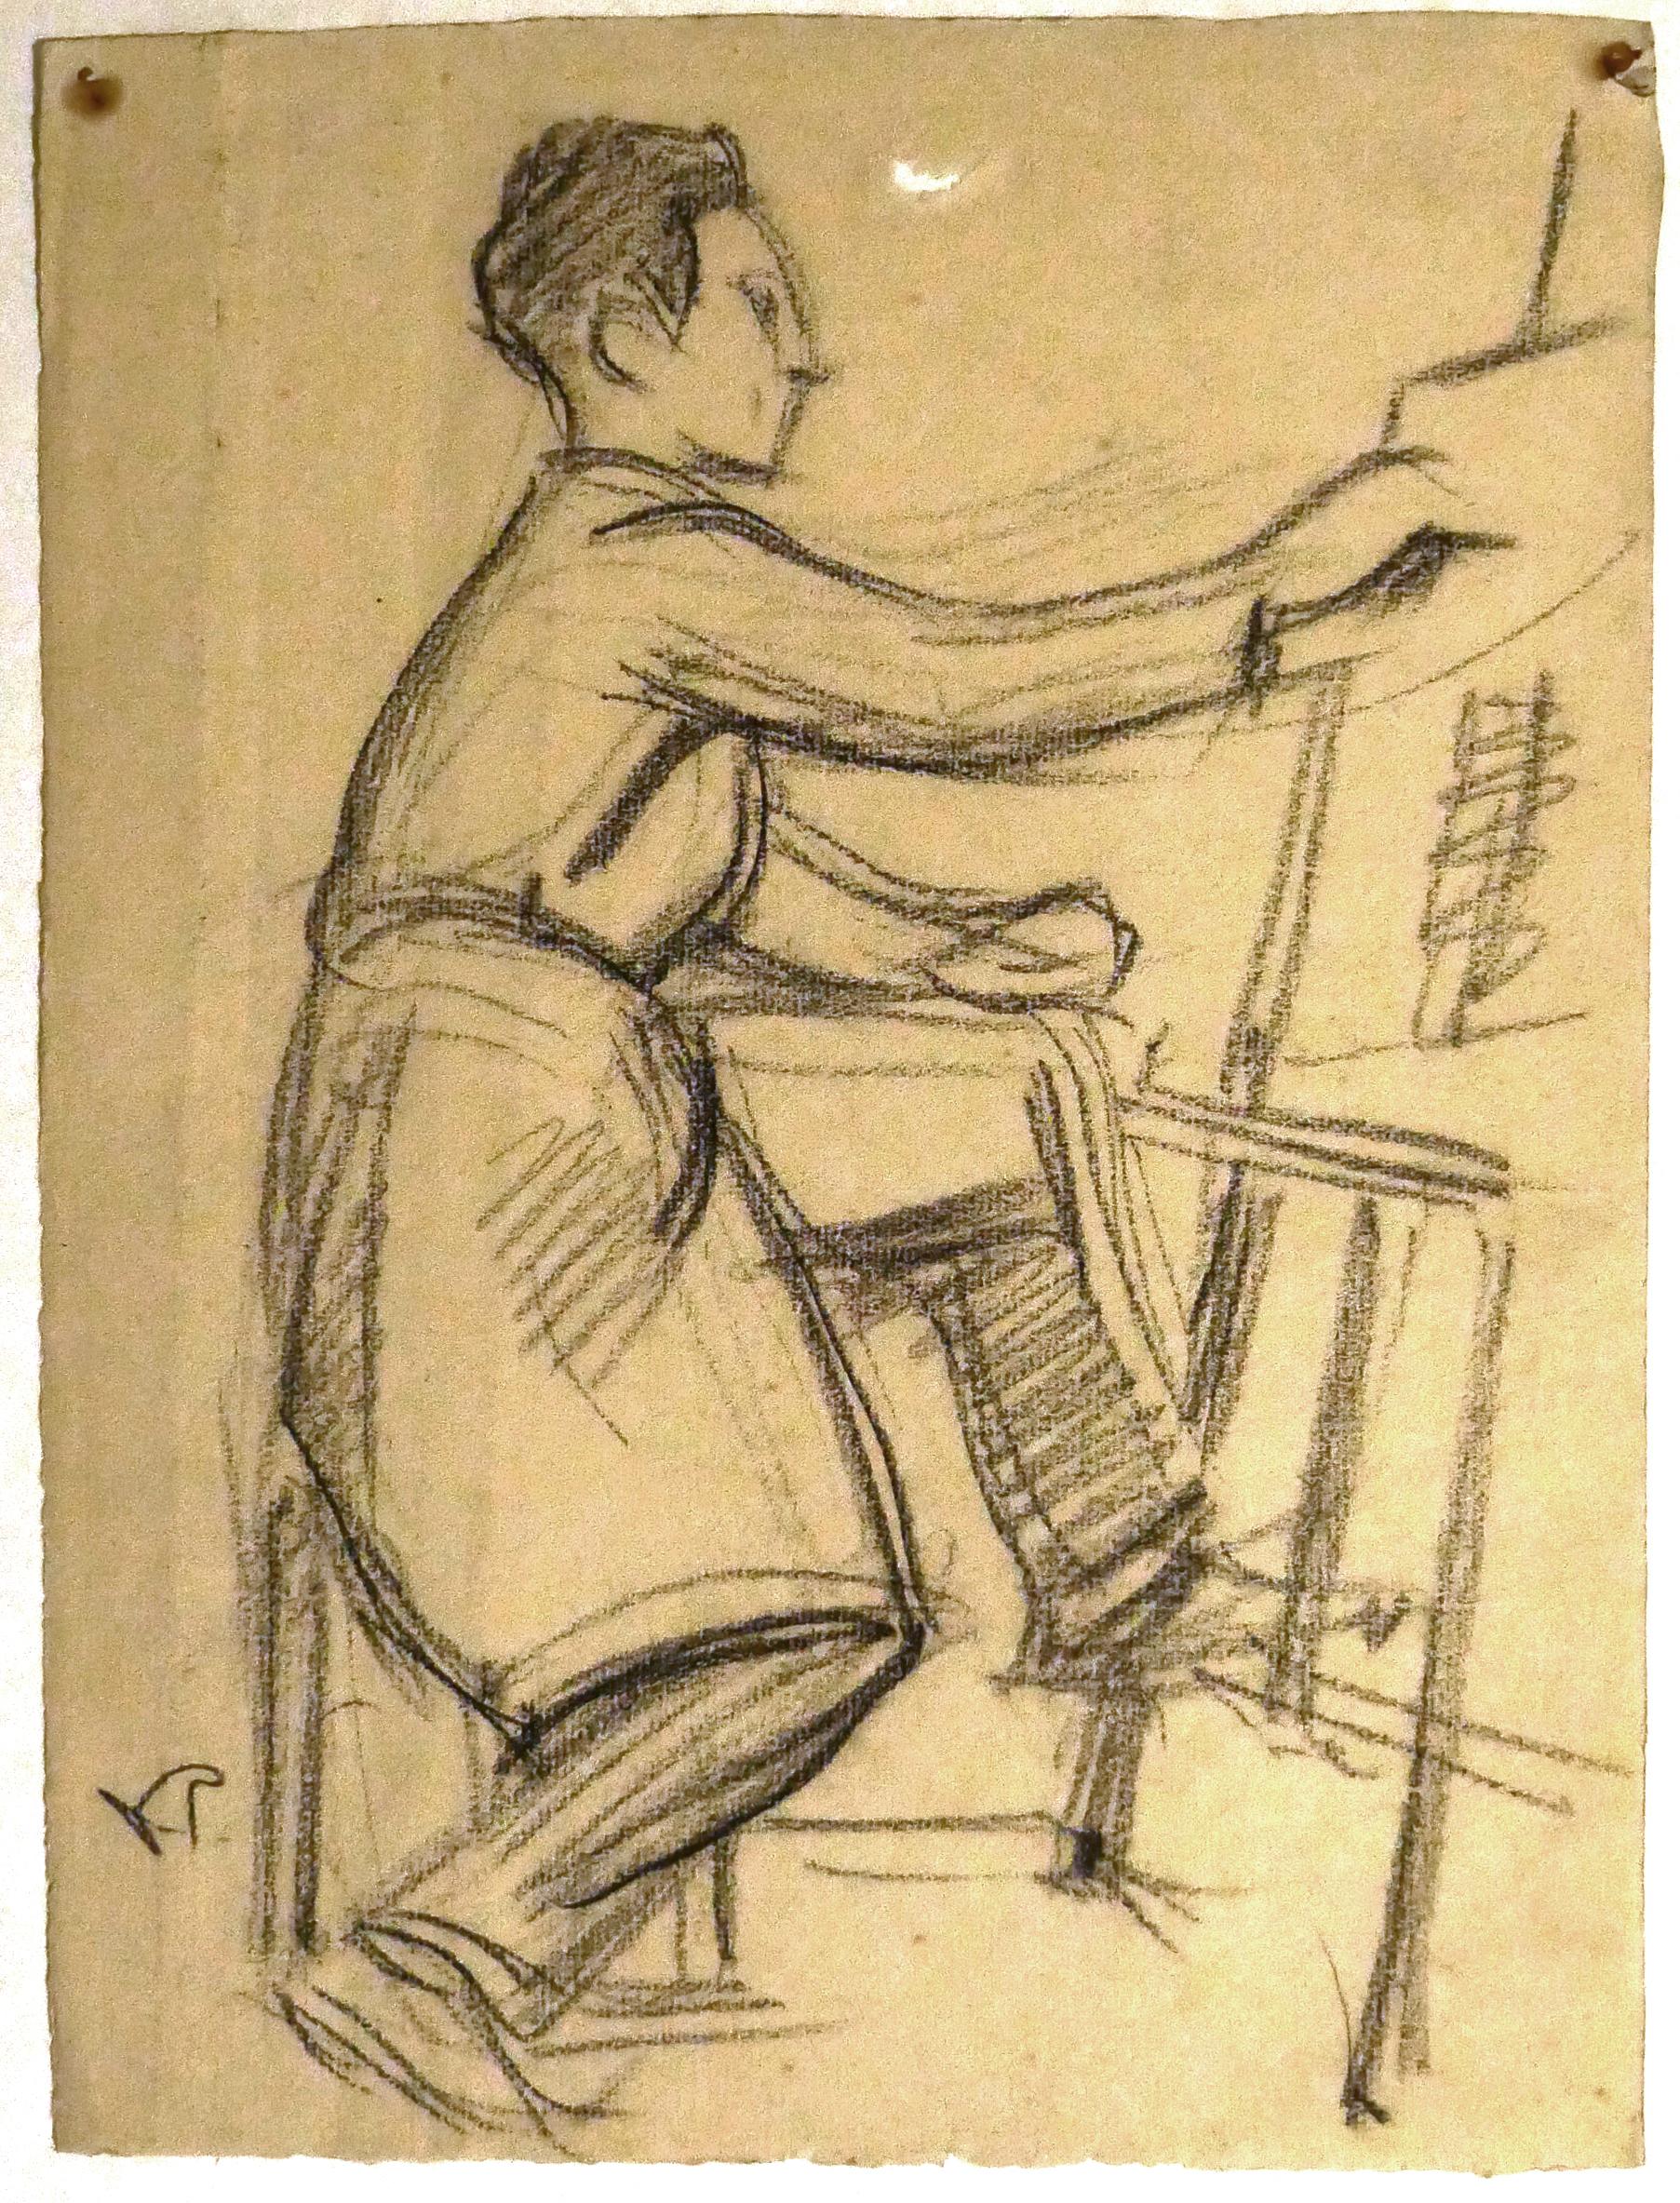 Victor Prout Figurative Art - Self Portrait - Original Pencil Drawing by V. Prout - Early 20th Century